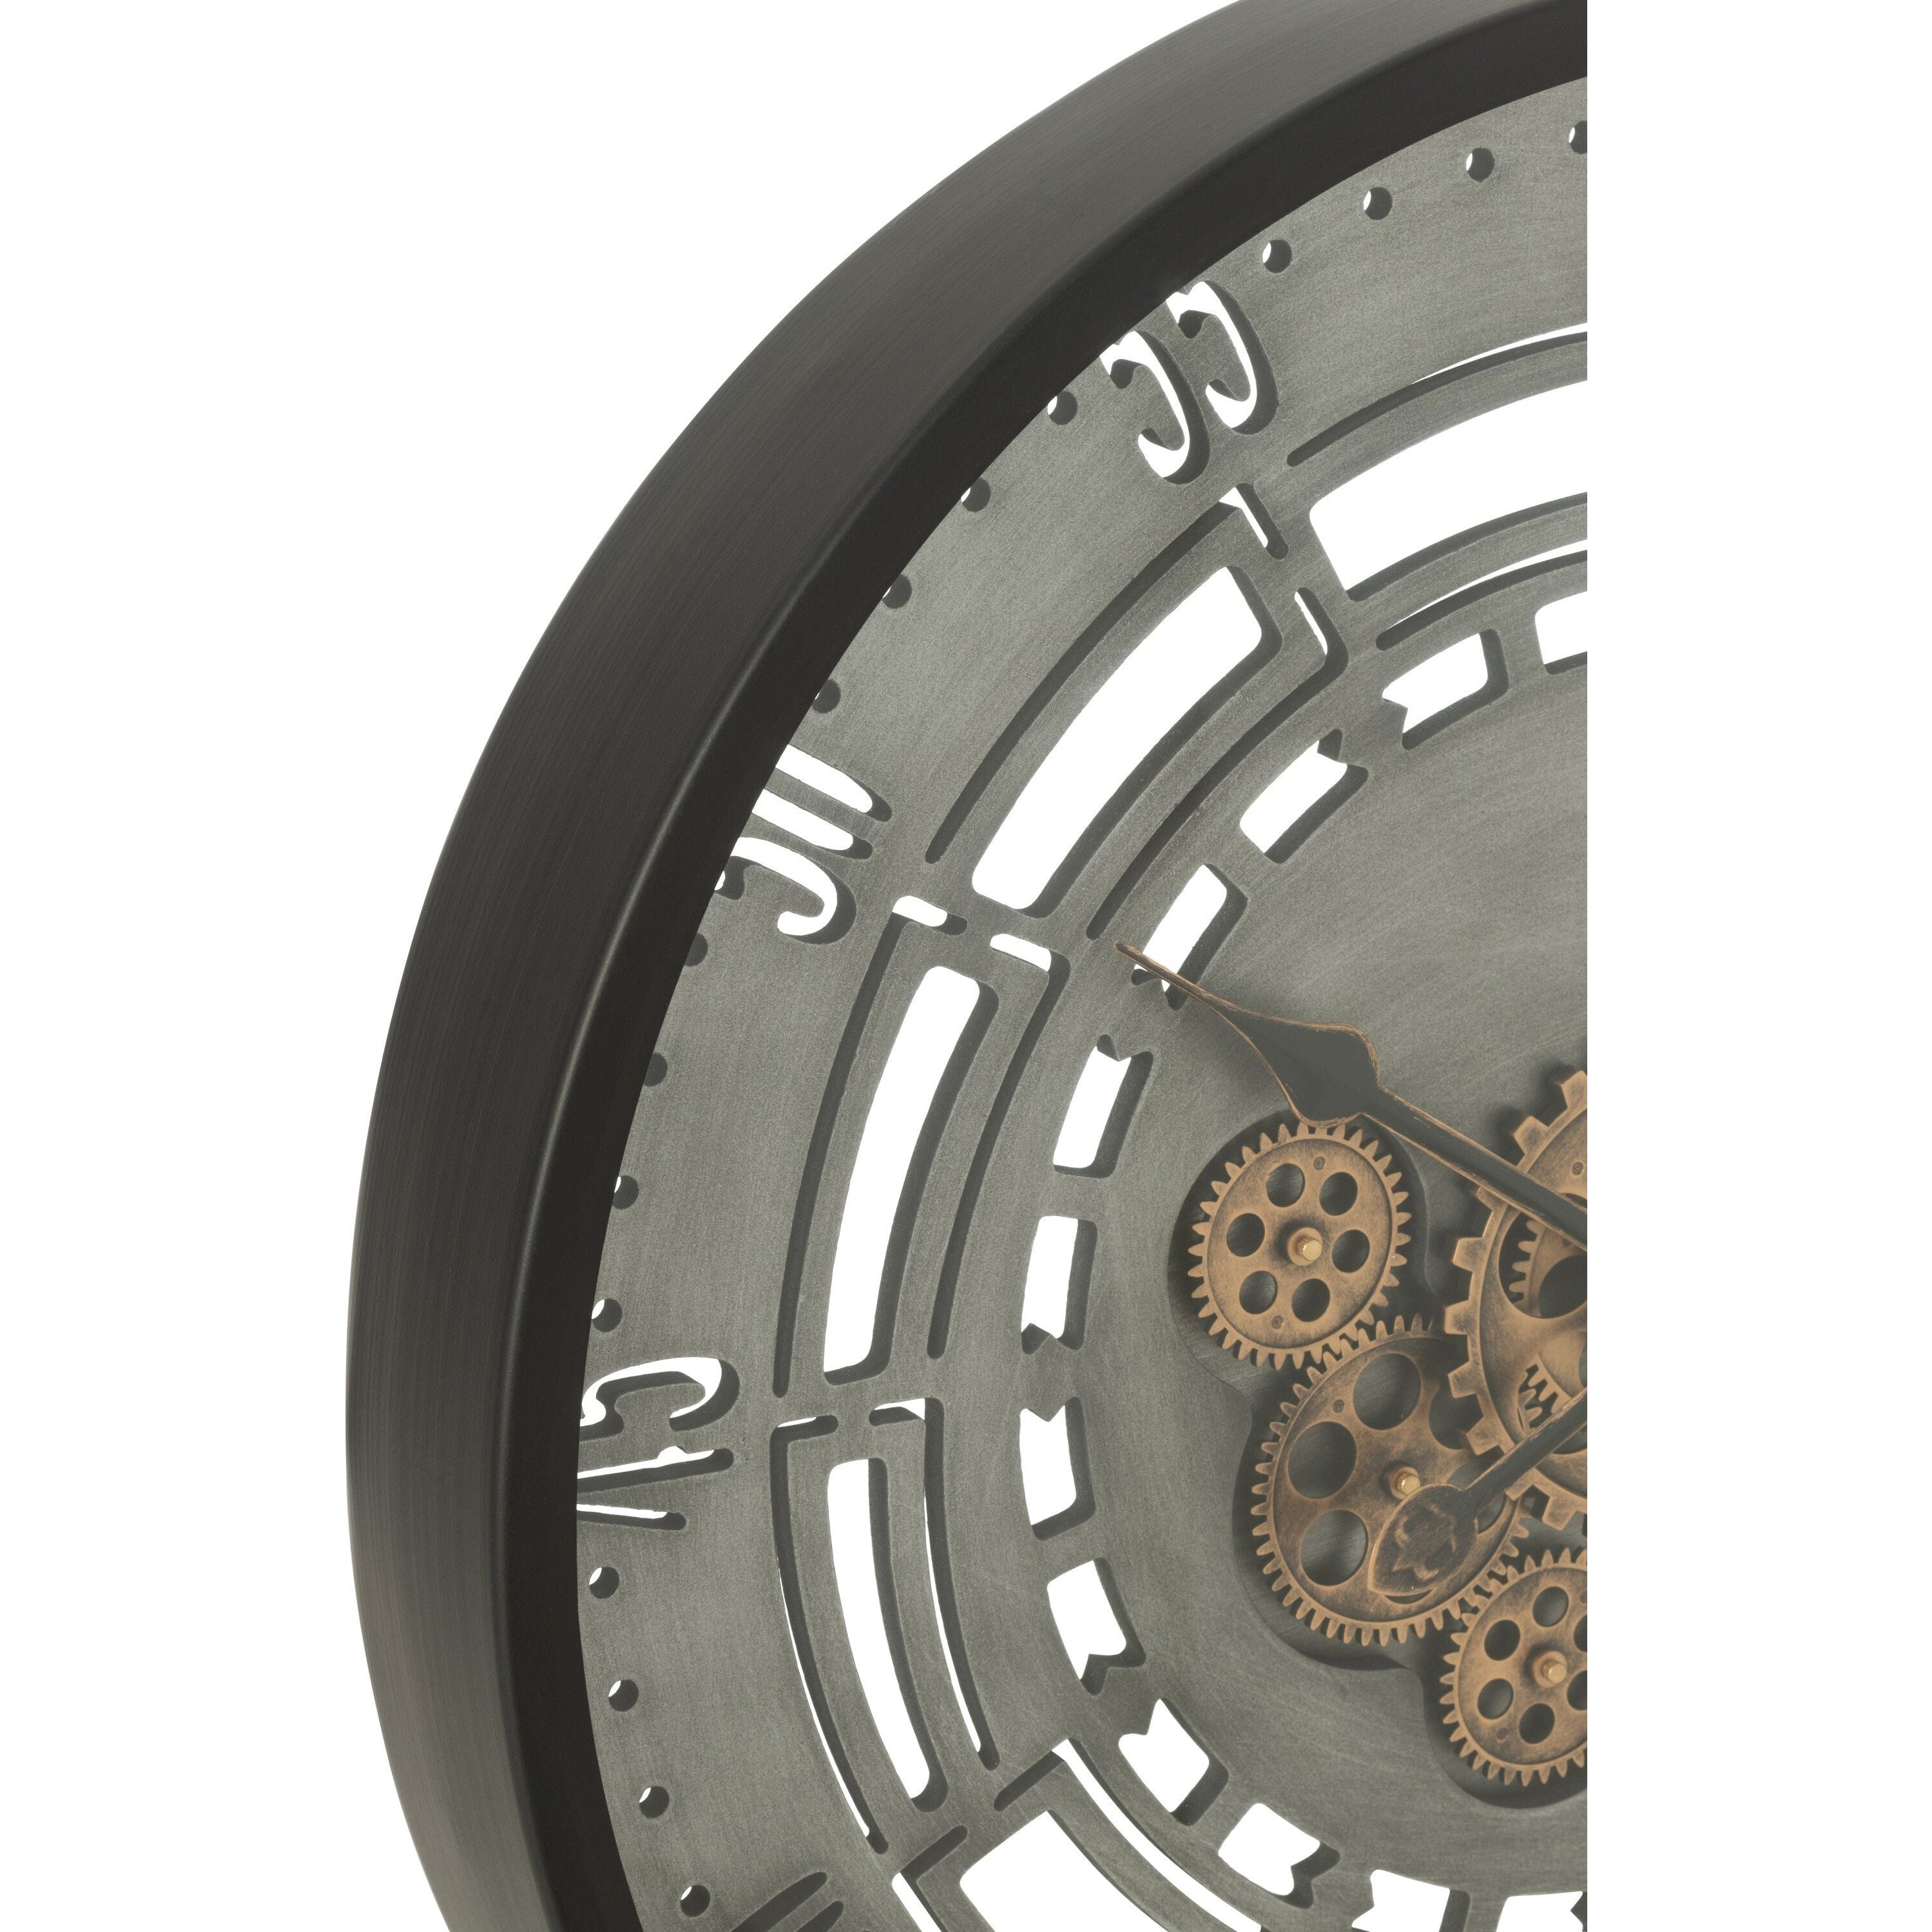 Clock Round Seconds Gears Metal Black/Gray Small